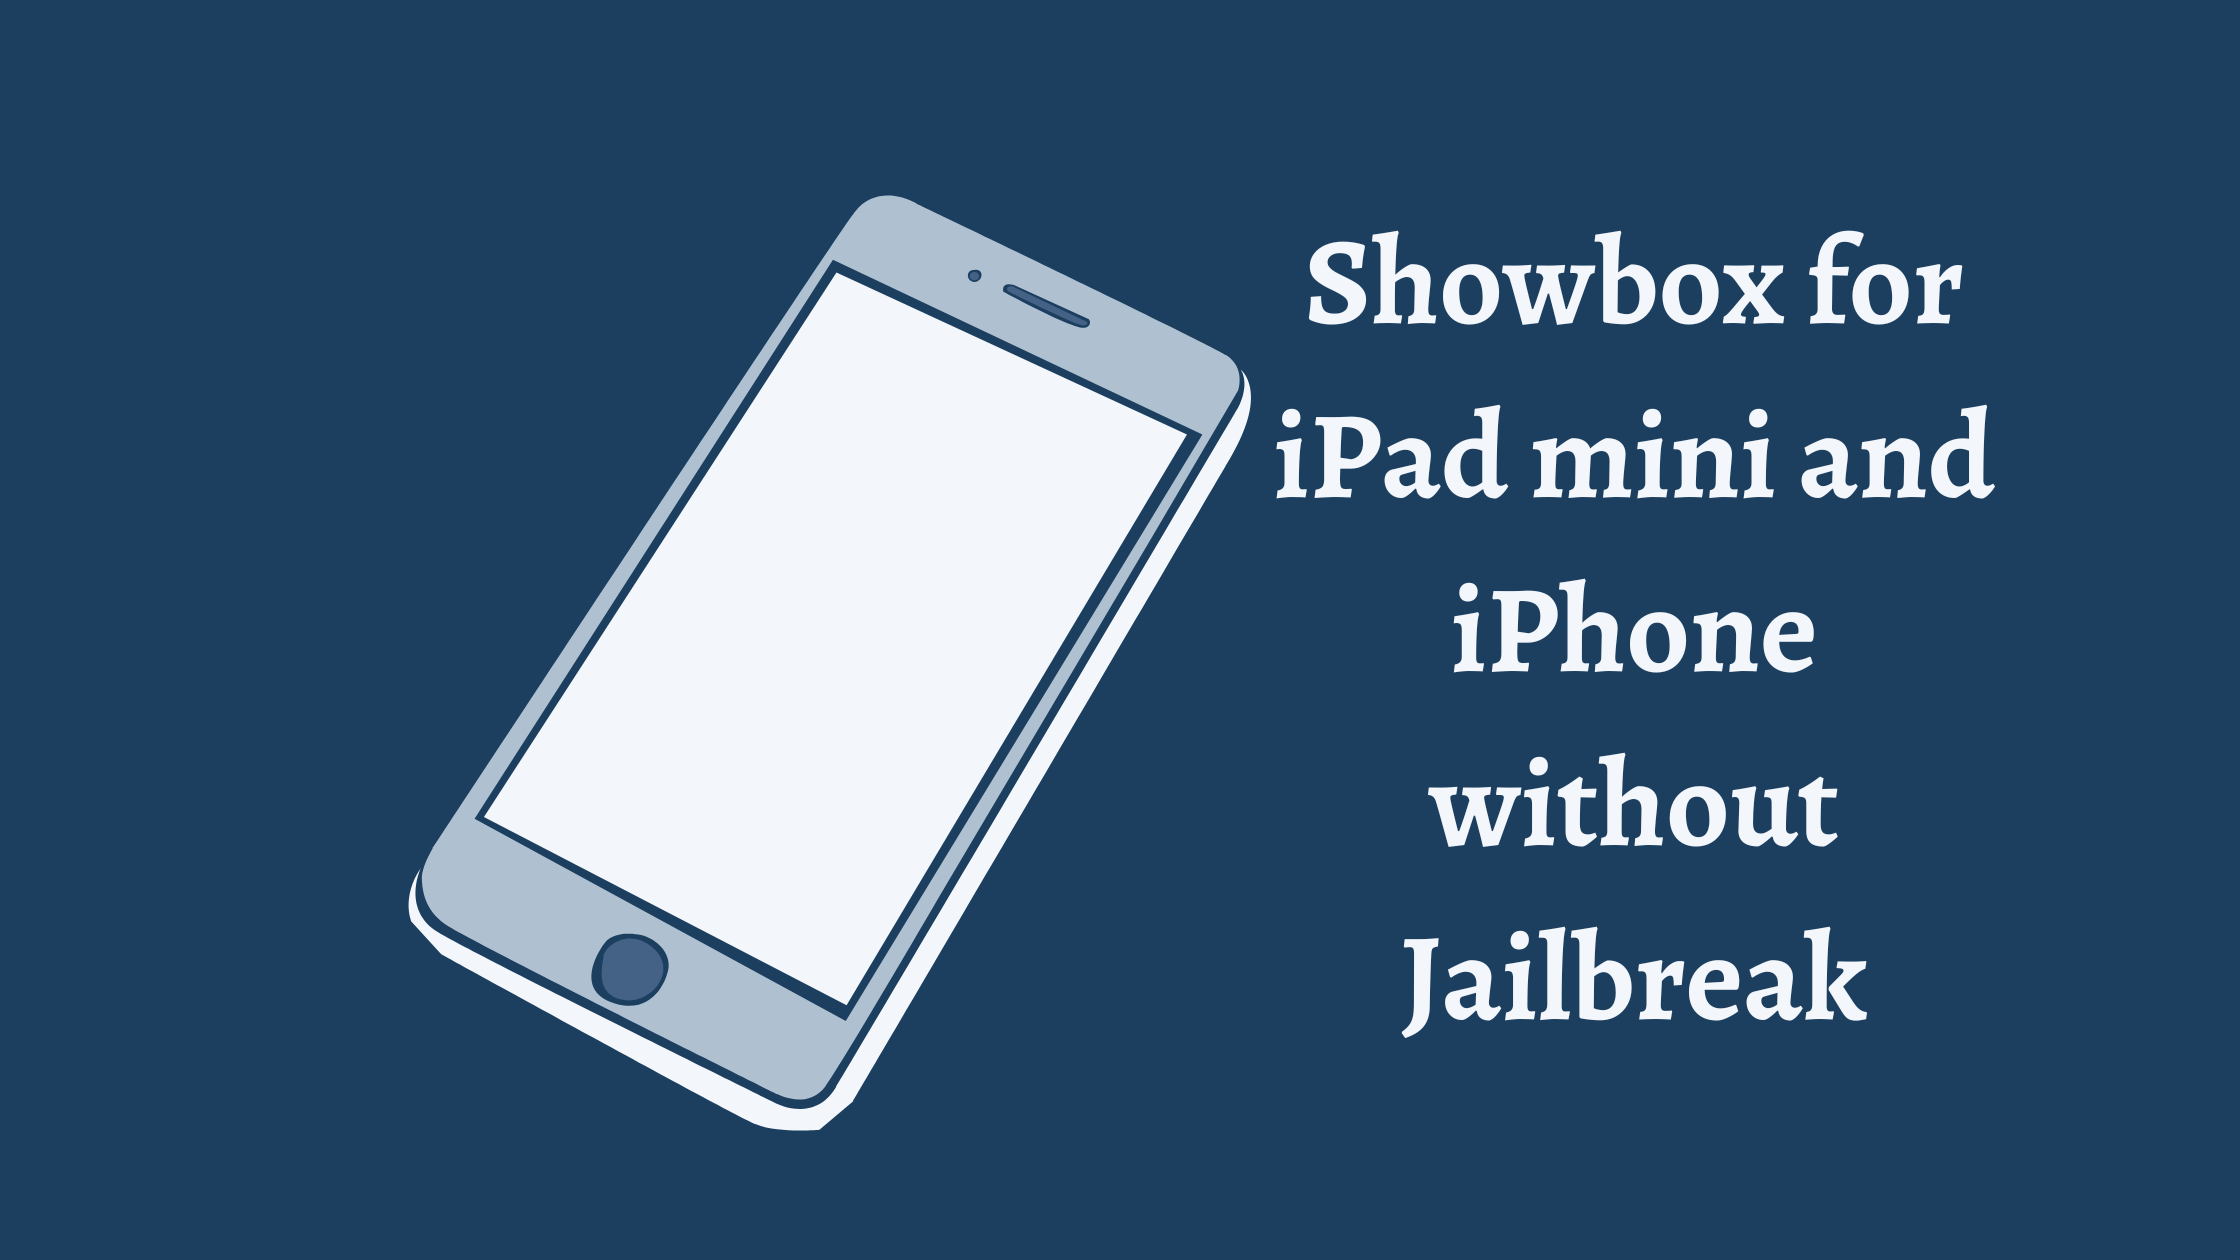 Showbox for iPad mini and iPhone without Jailbreak